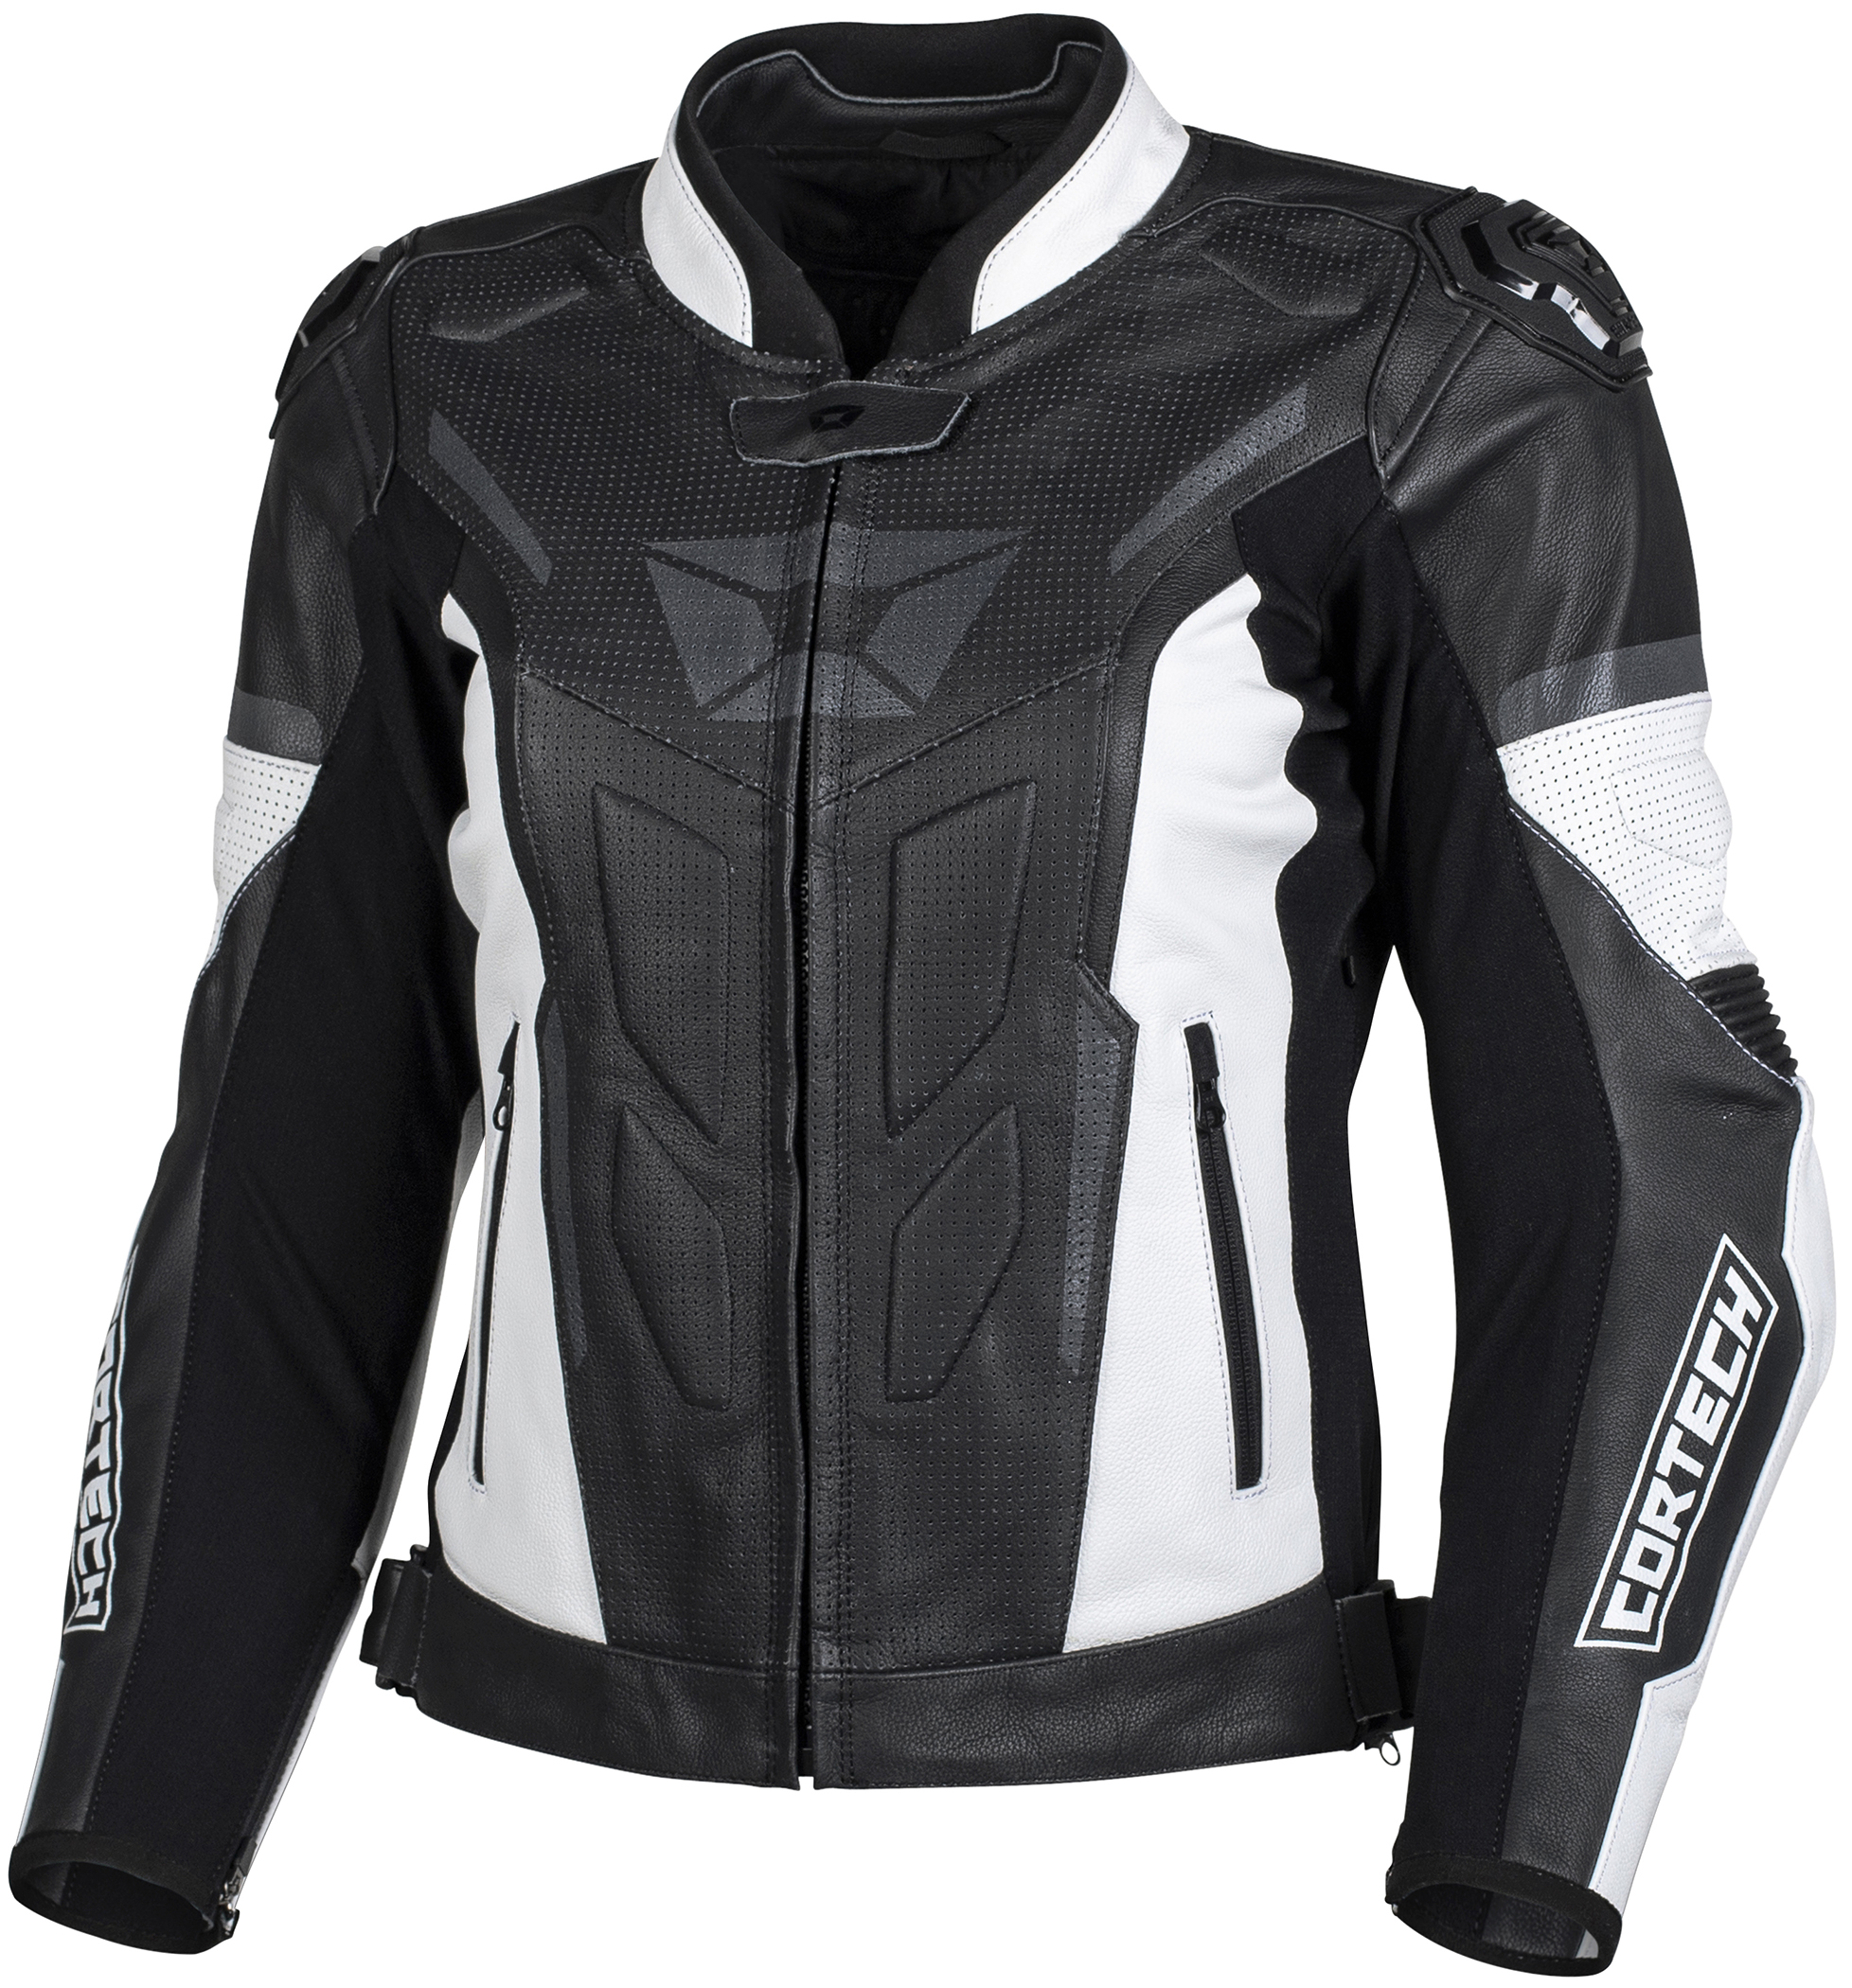 Viewing Images For Cortech Apex Jacket for Women :: MotorcycleGear.com